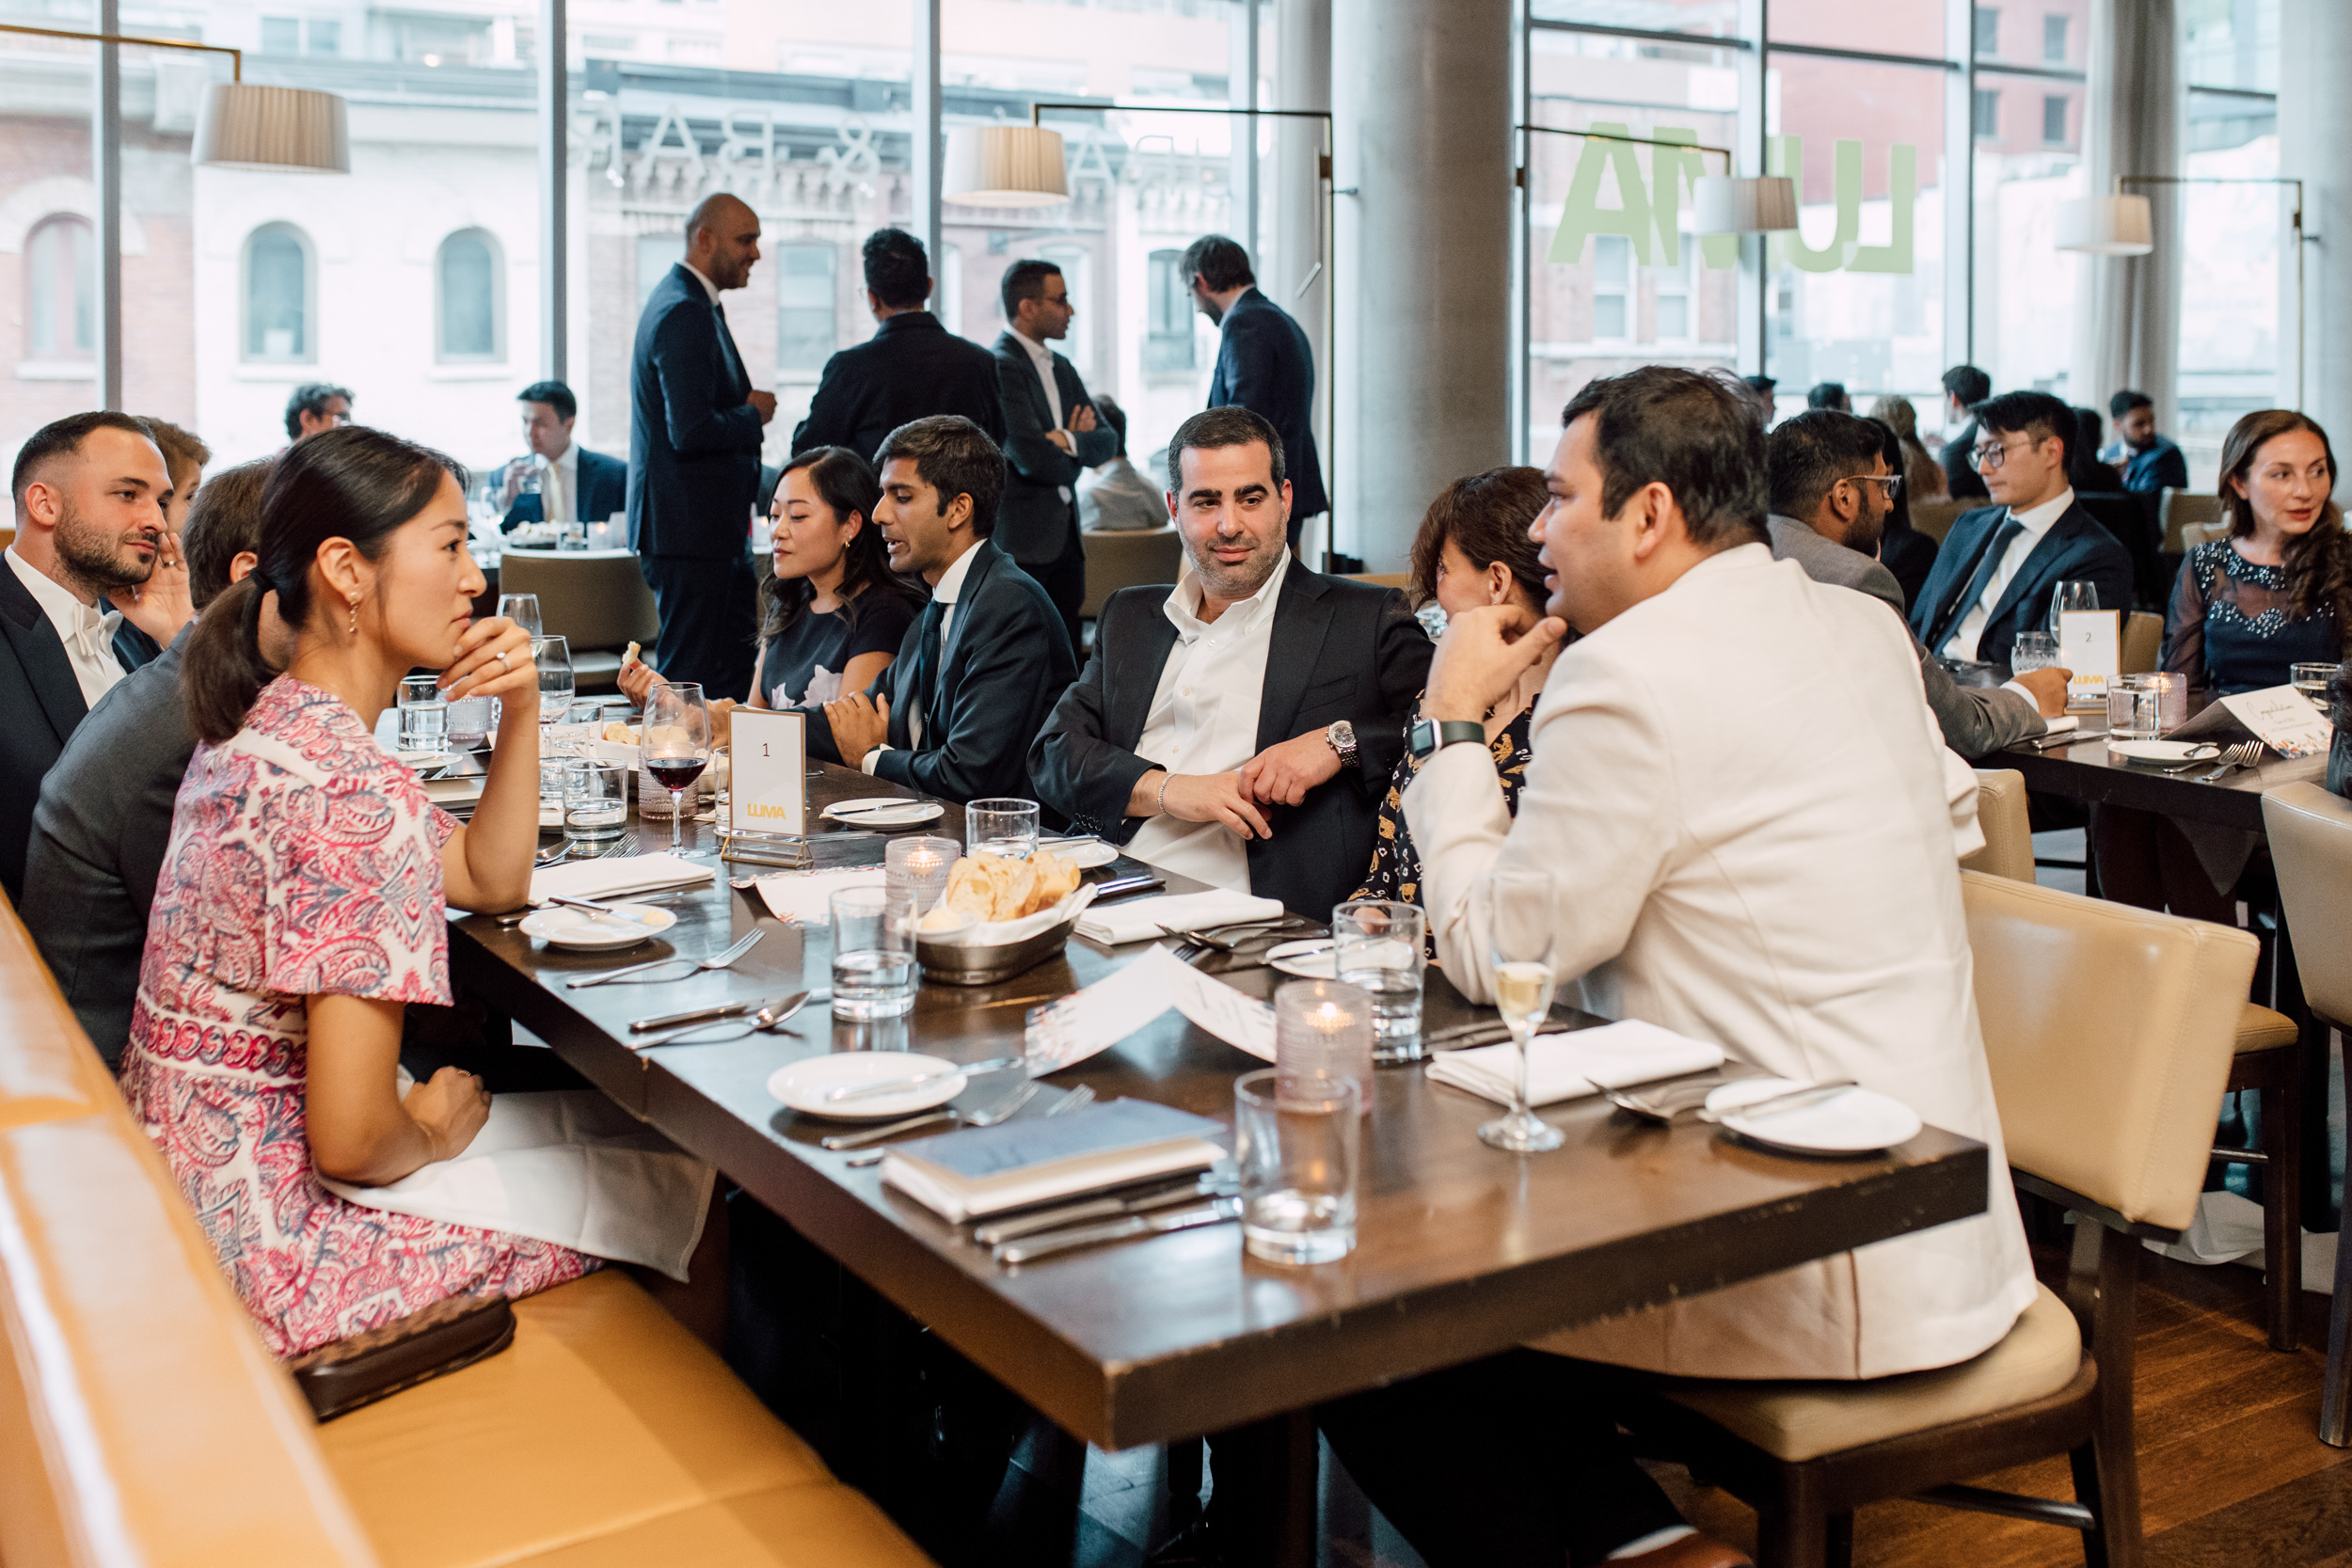 A group of people at a graduation event sitting at a table in a restaurant.